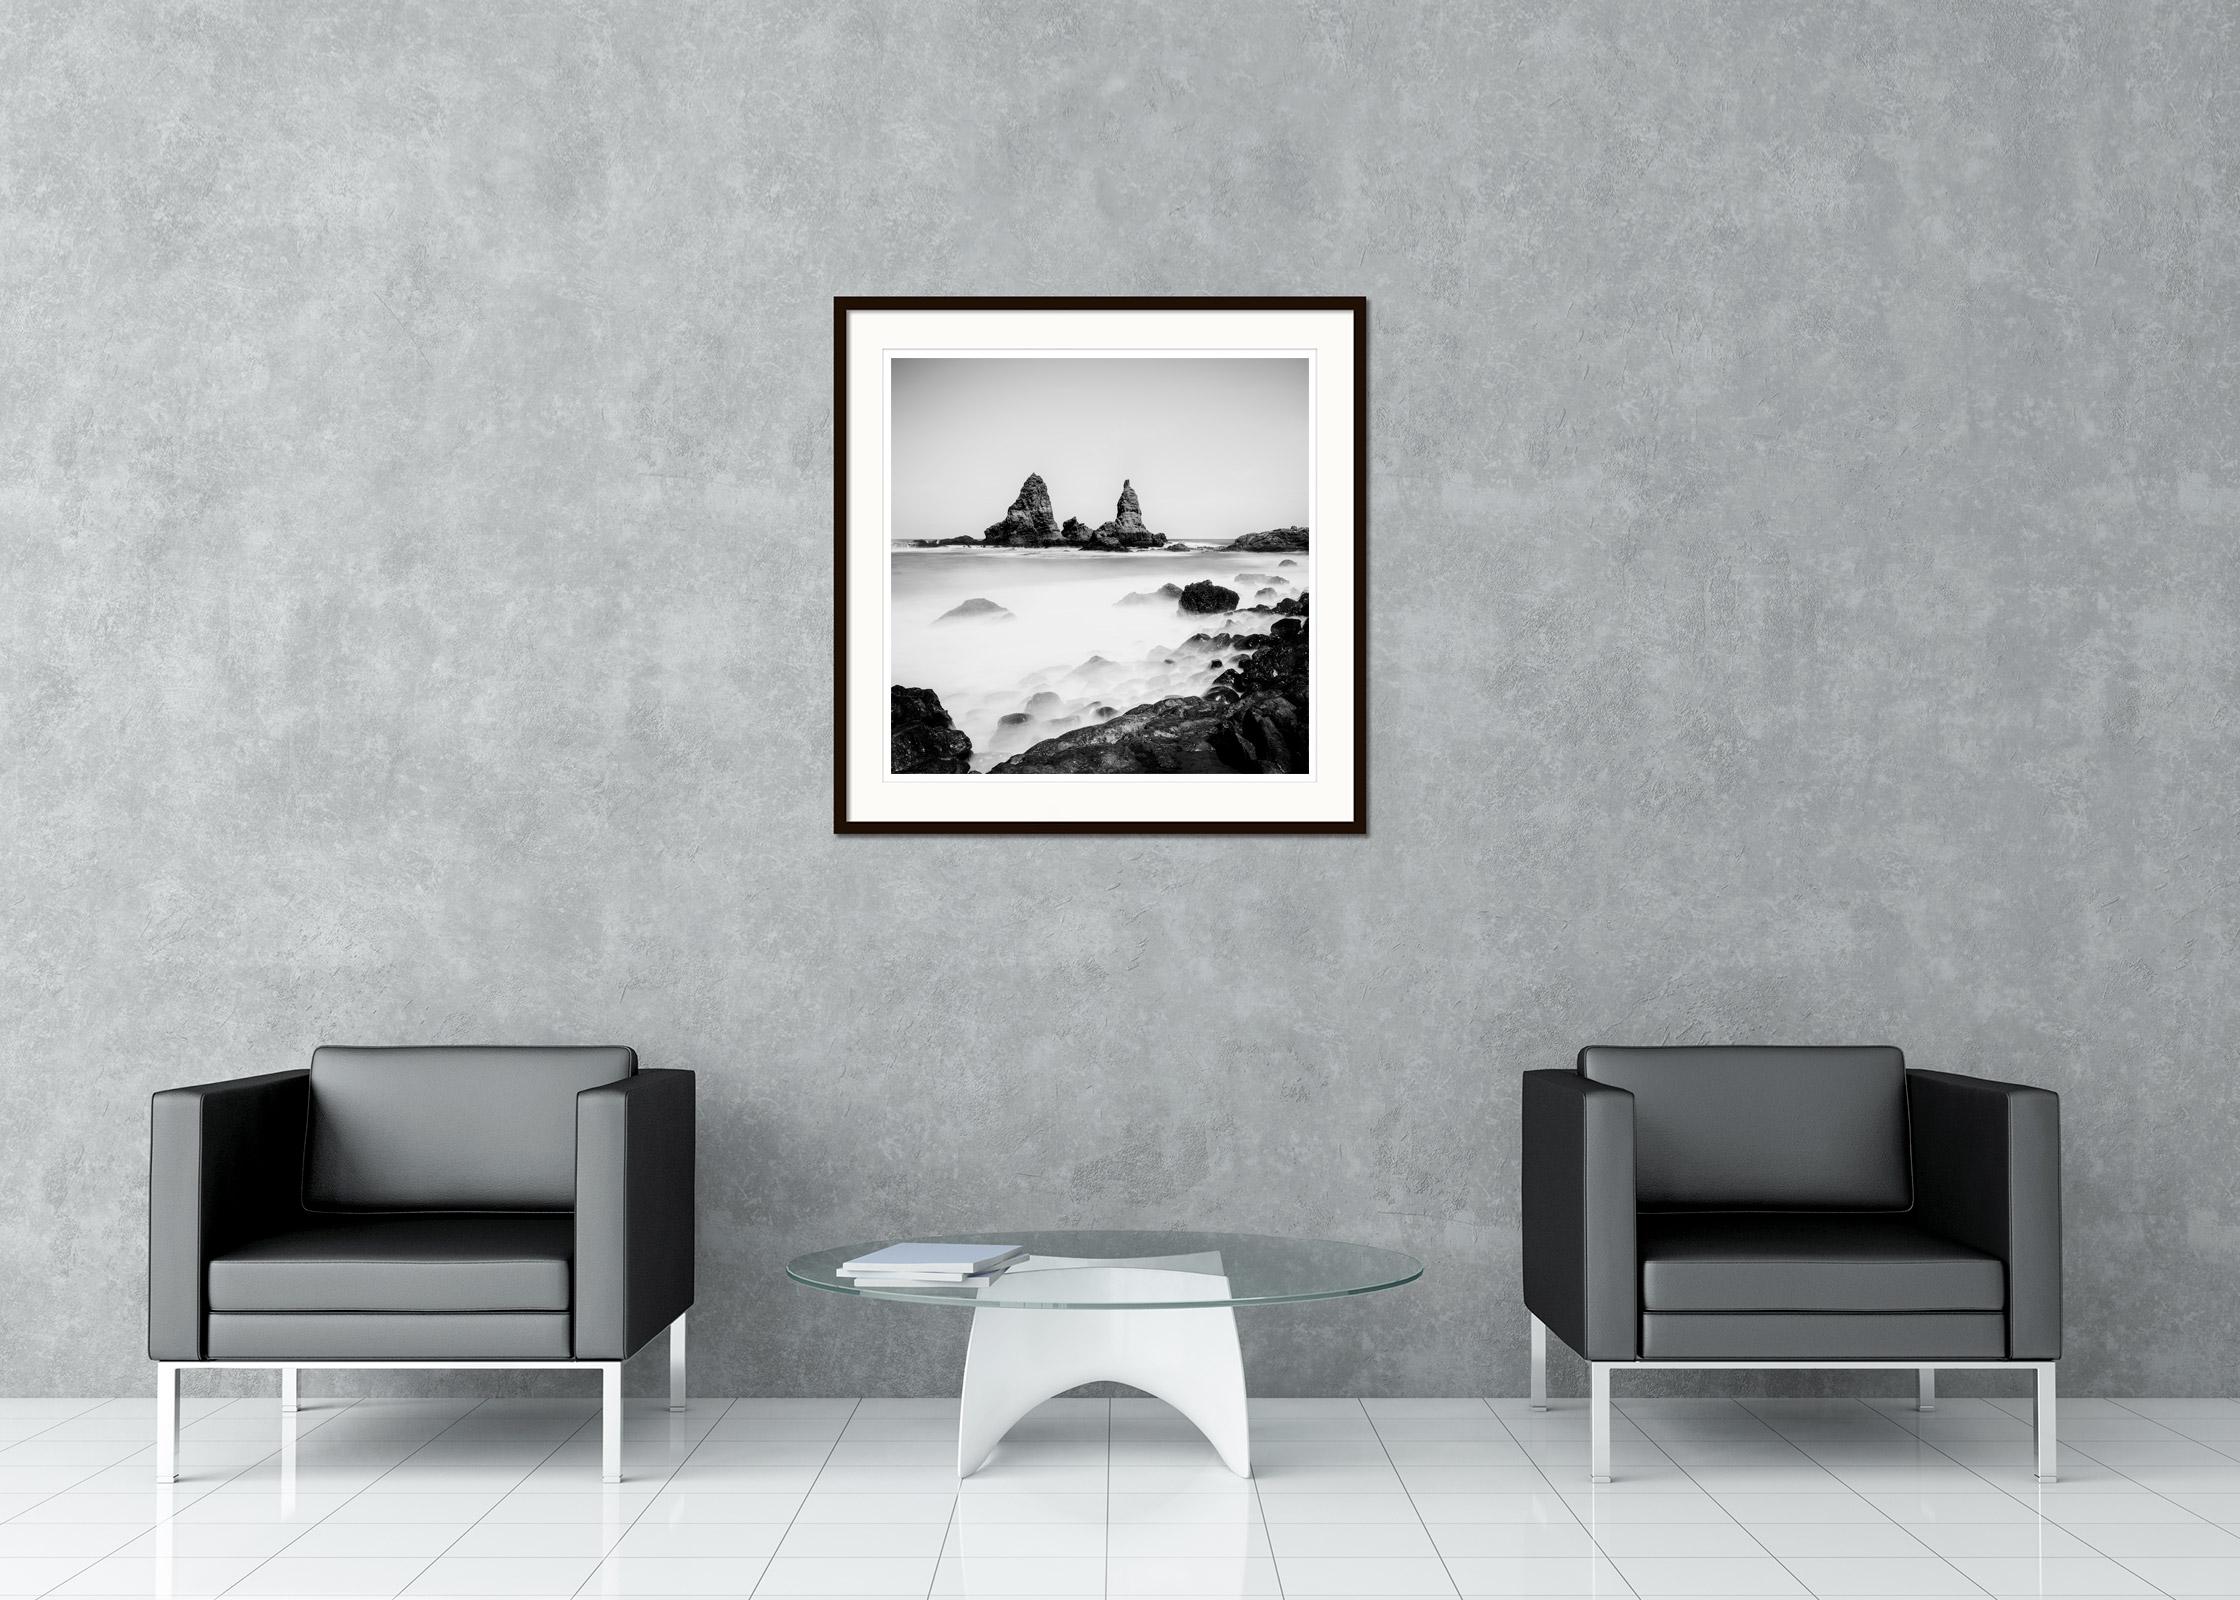 Black and White Fine Art landscape photography. Volcanic rocks, Roques de Arguamul, La Gomera, Canary Islands, Spain. Archival pigment ink print, edition of 7. Signed, titled, dated and numbered by artist. Certificate of authenticity included.